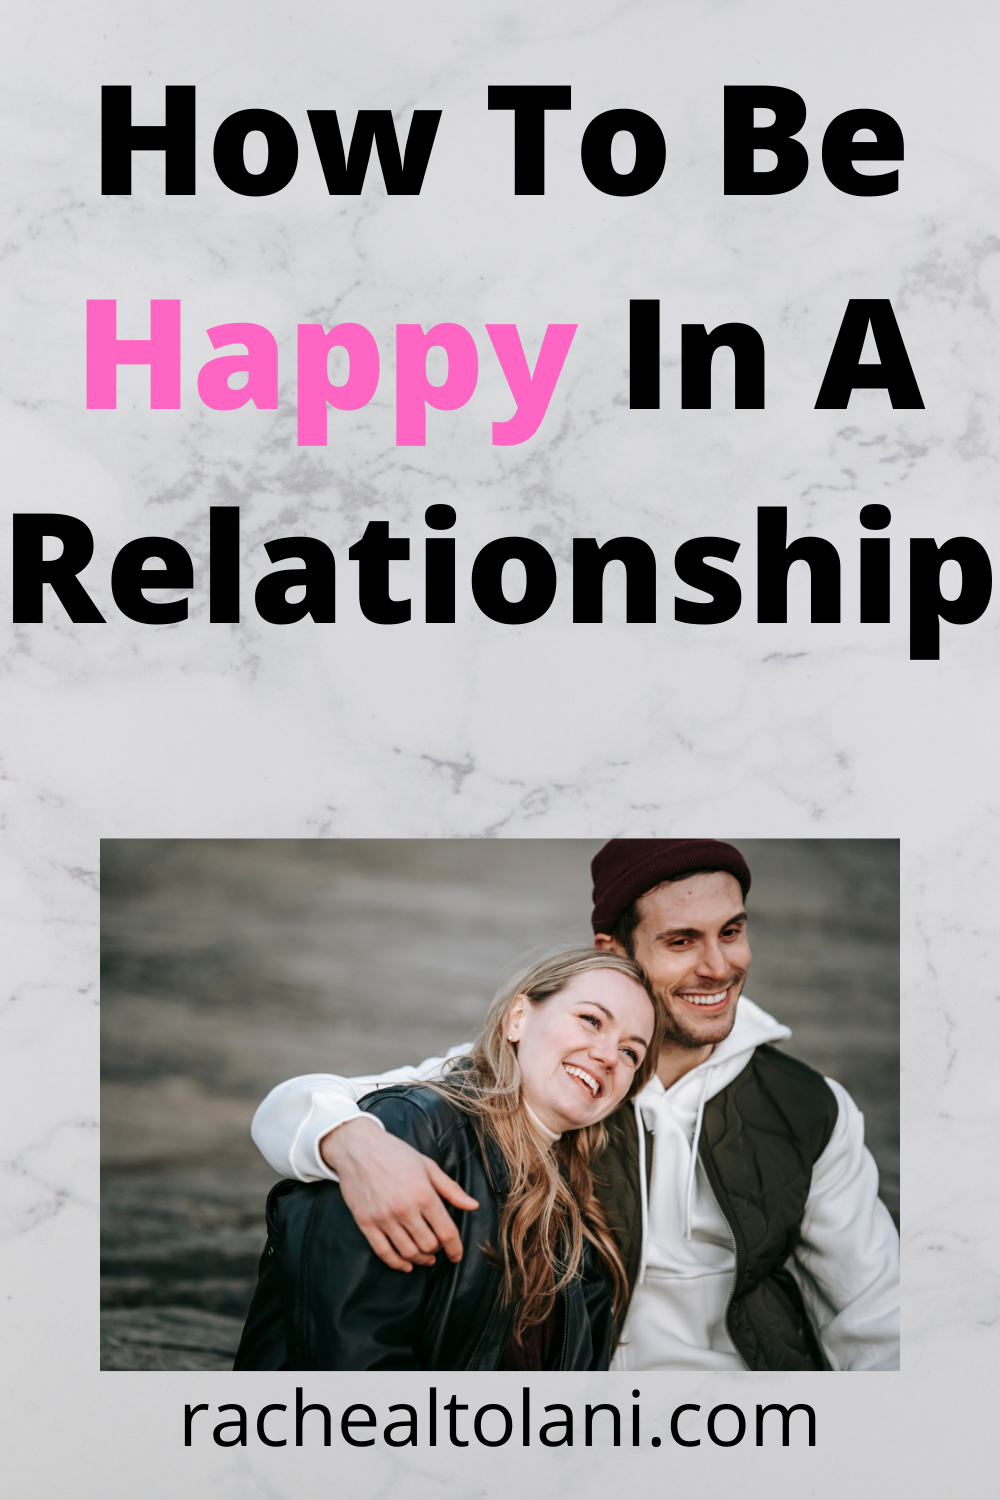 How to be happy in a relationship